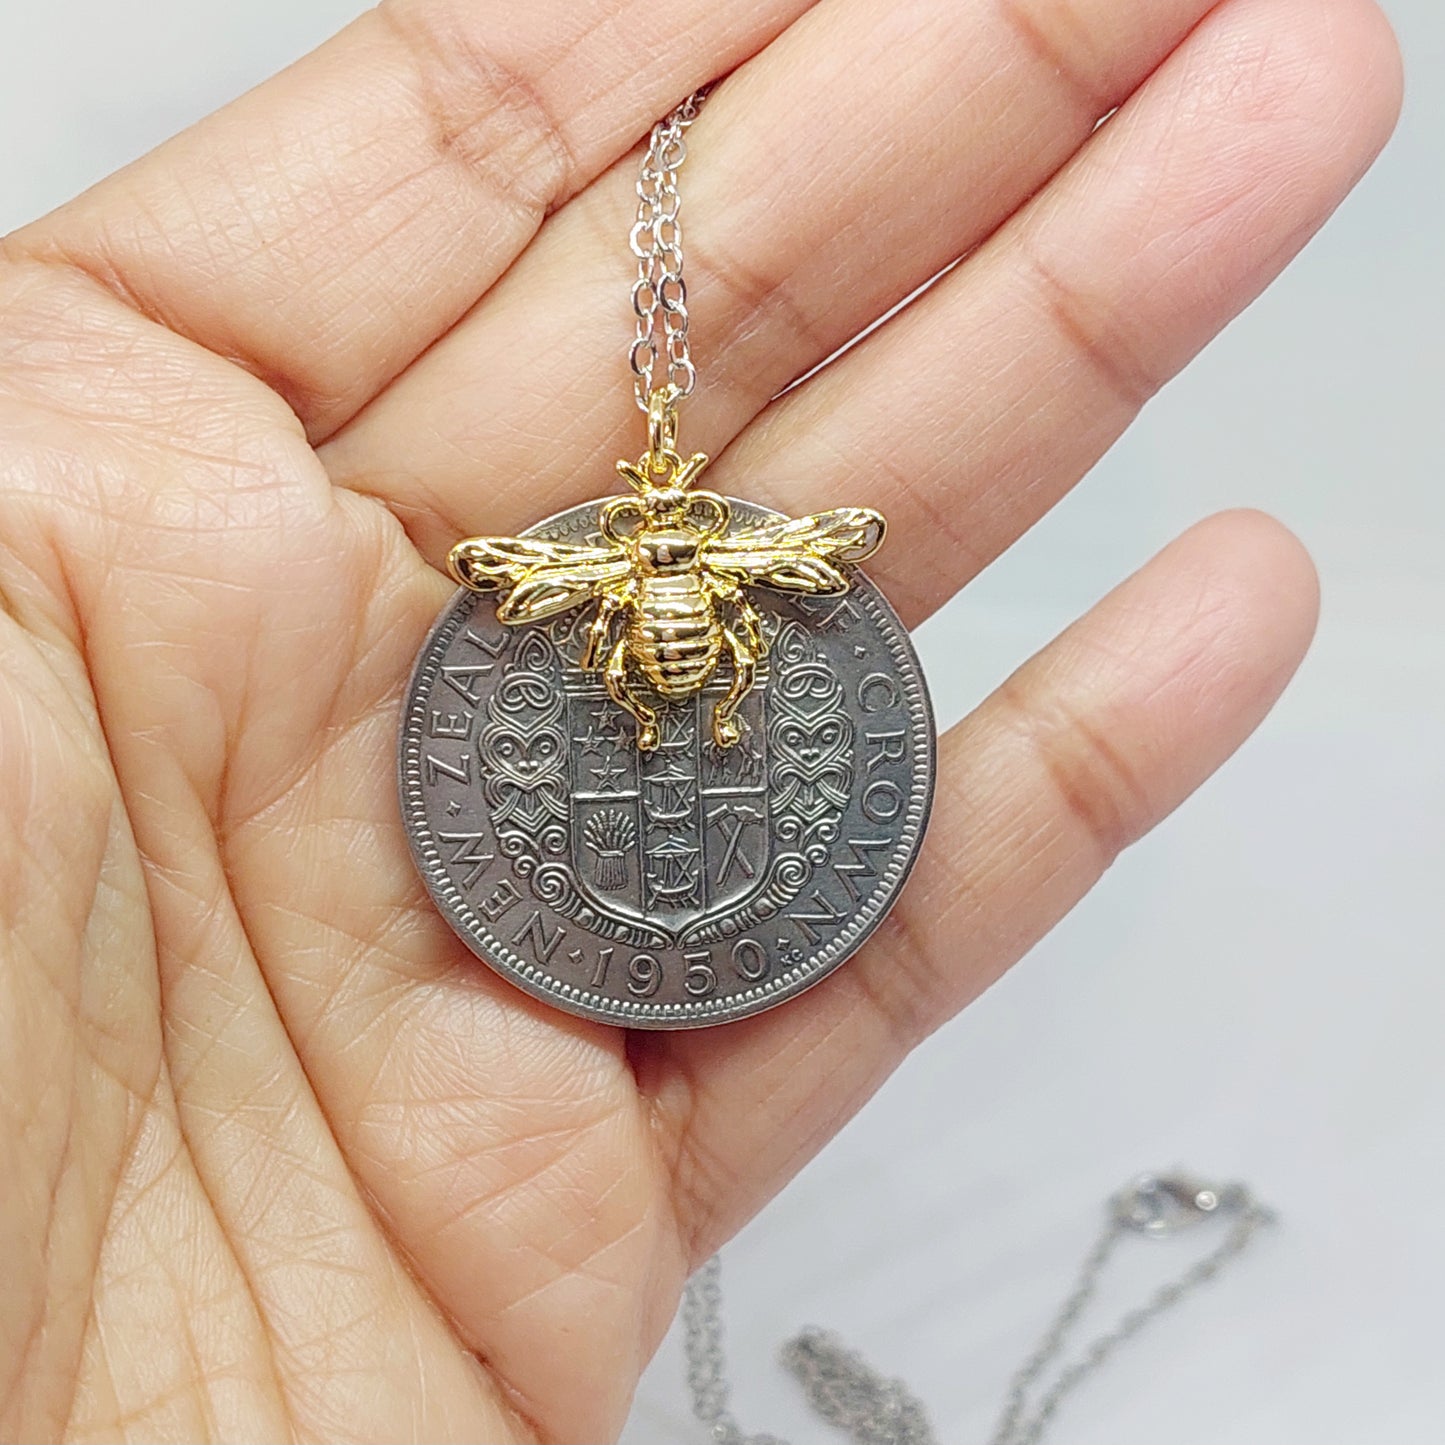 NEW!! Re-minted Half Crown Pendant with Large Gold Honeybee